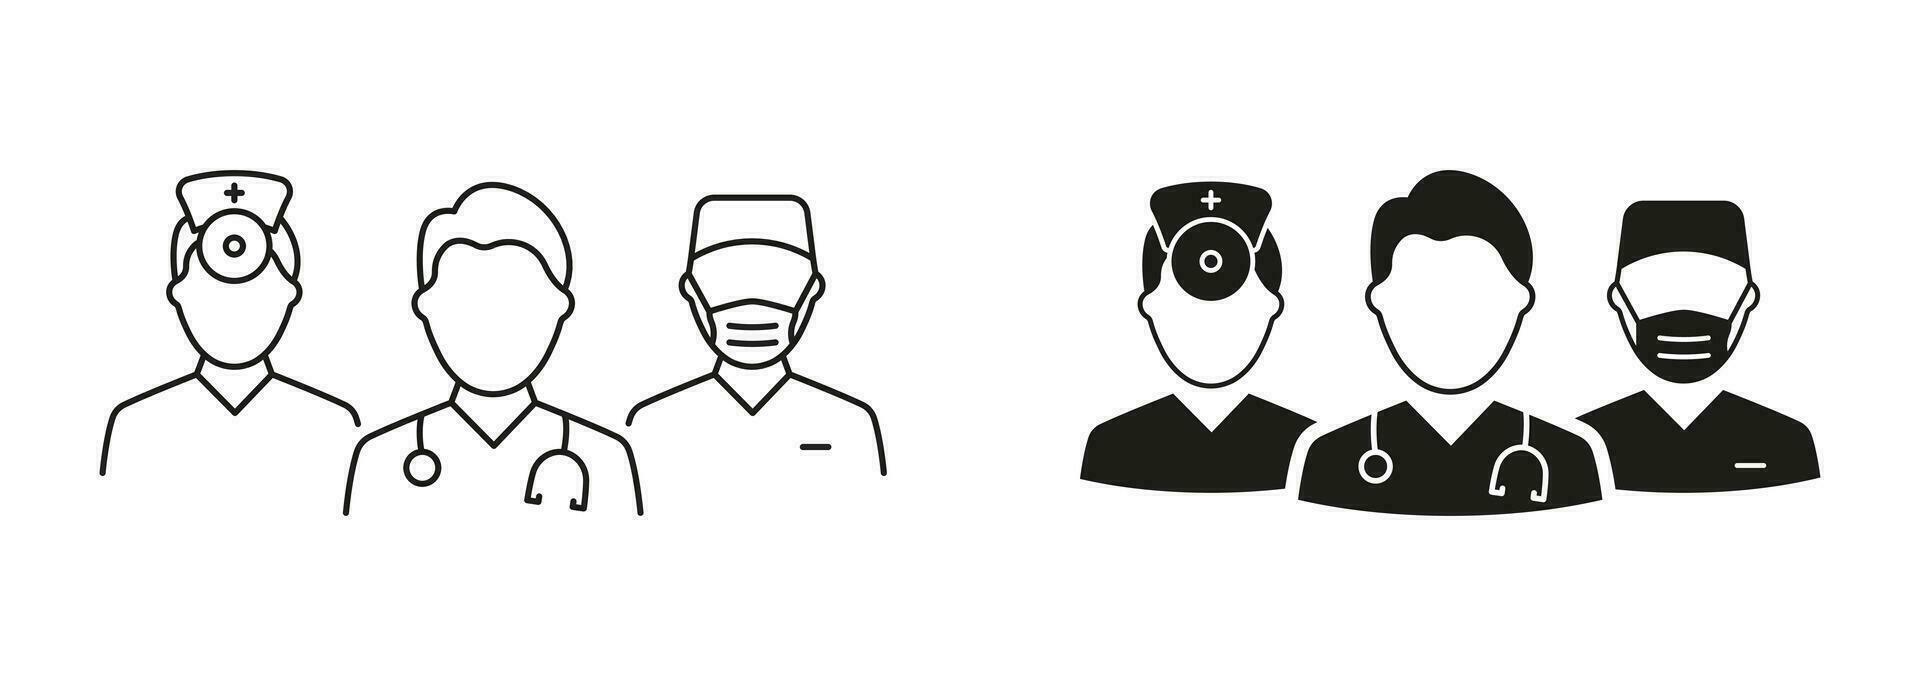 Medical Specialists Group Pictogram Set. Doctors and Nurse Team Line and Silhouette Icons. Healthcare Professional Hospital Staff Black Symbol Collection. Isolated Vector Illustration.